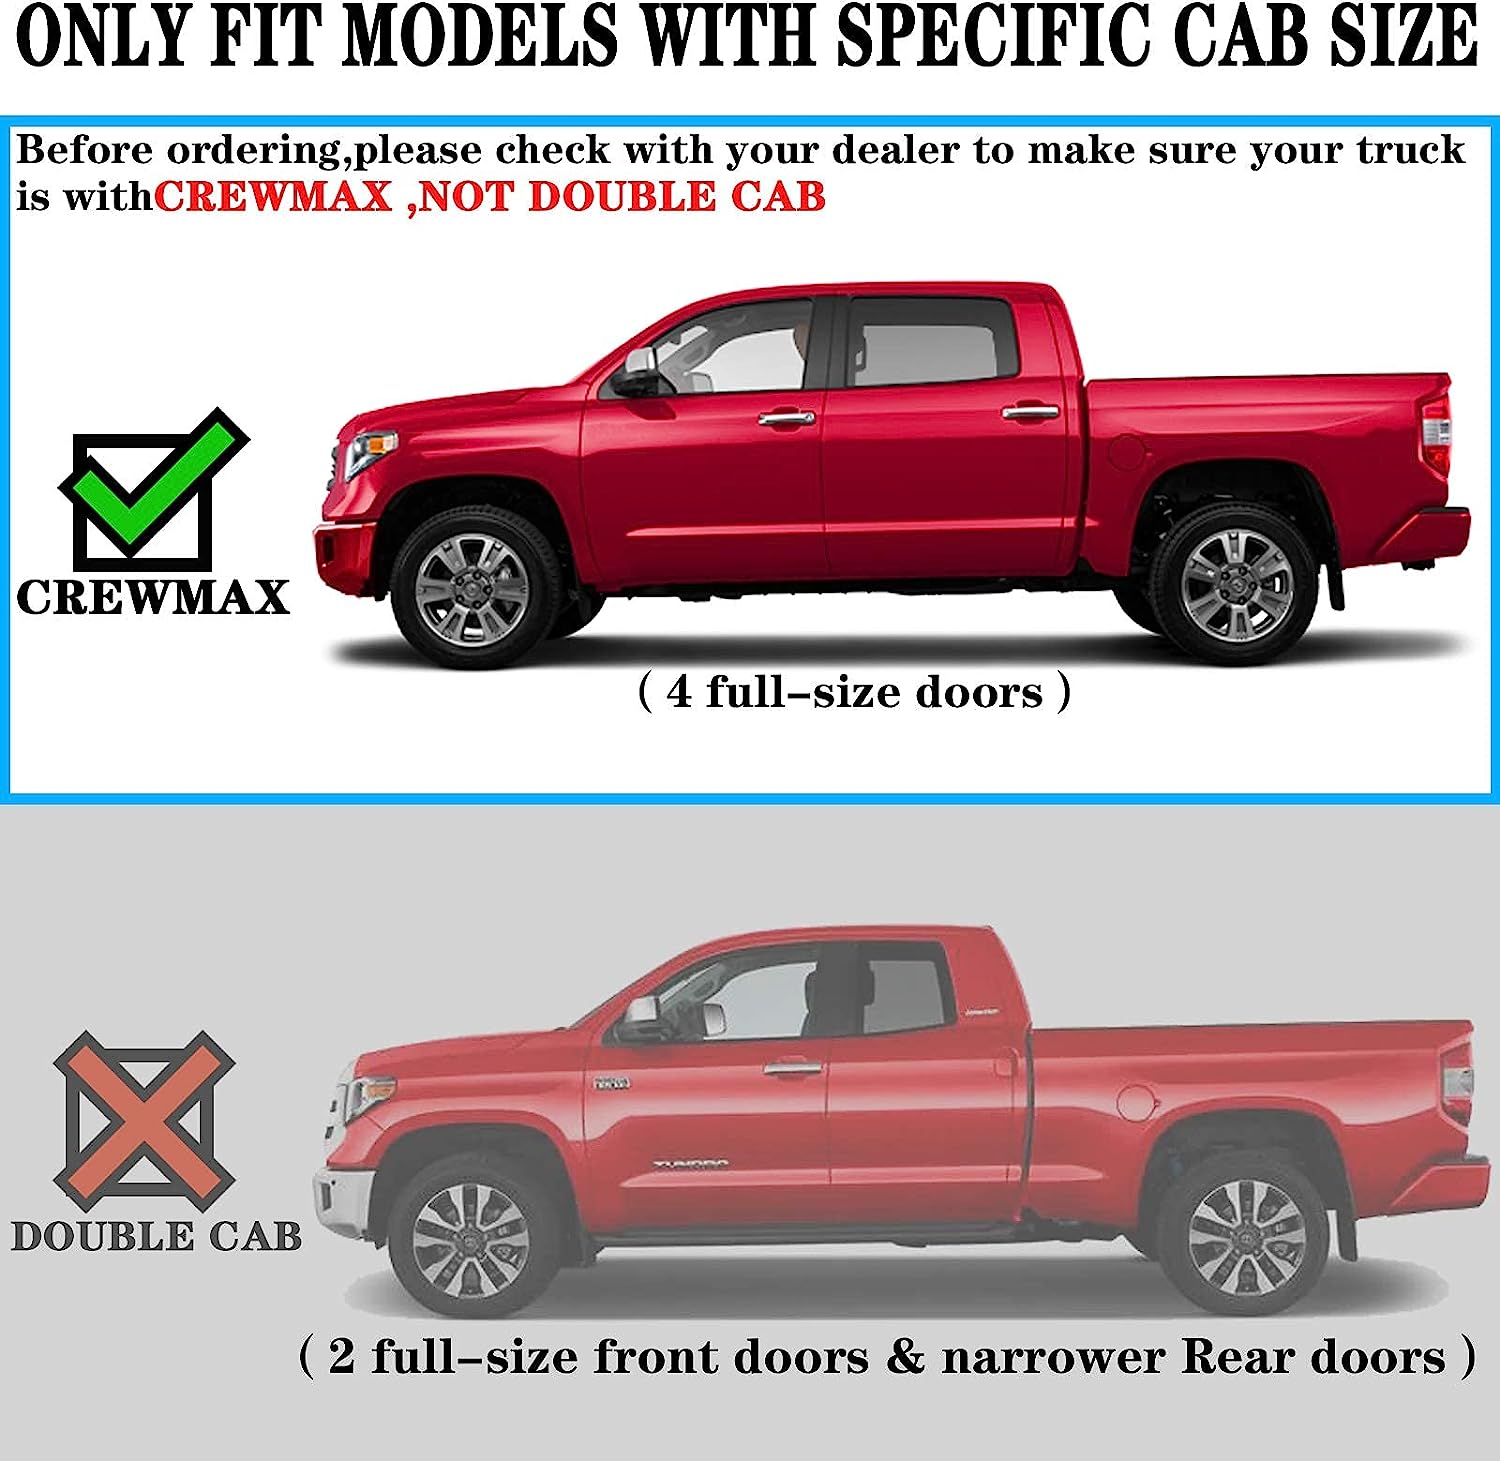 Running Boards Compatible for 2007-2021 Toyota Tundra Crew Max C43 Style. - COMNOVA AUTOPART